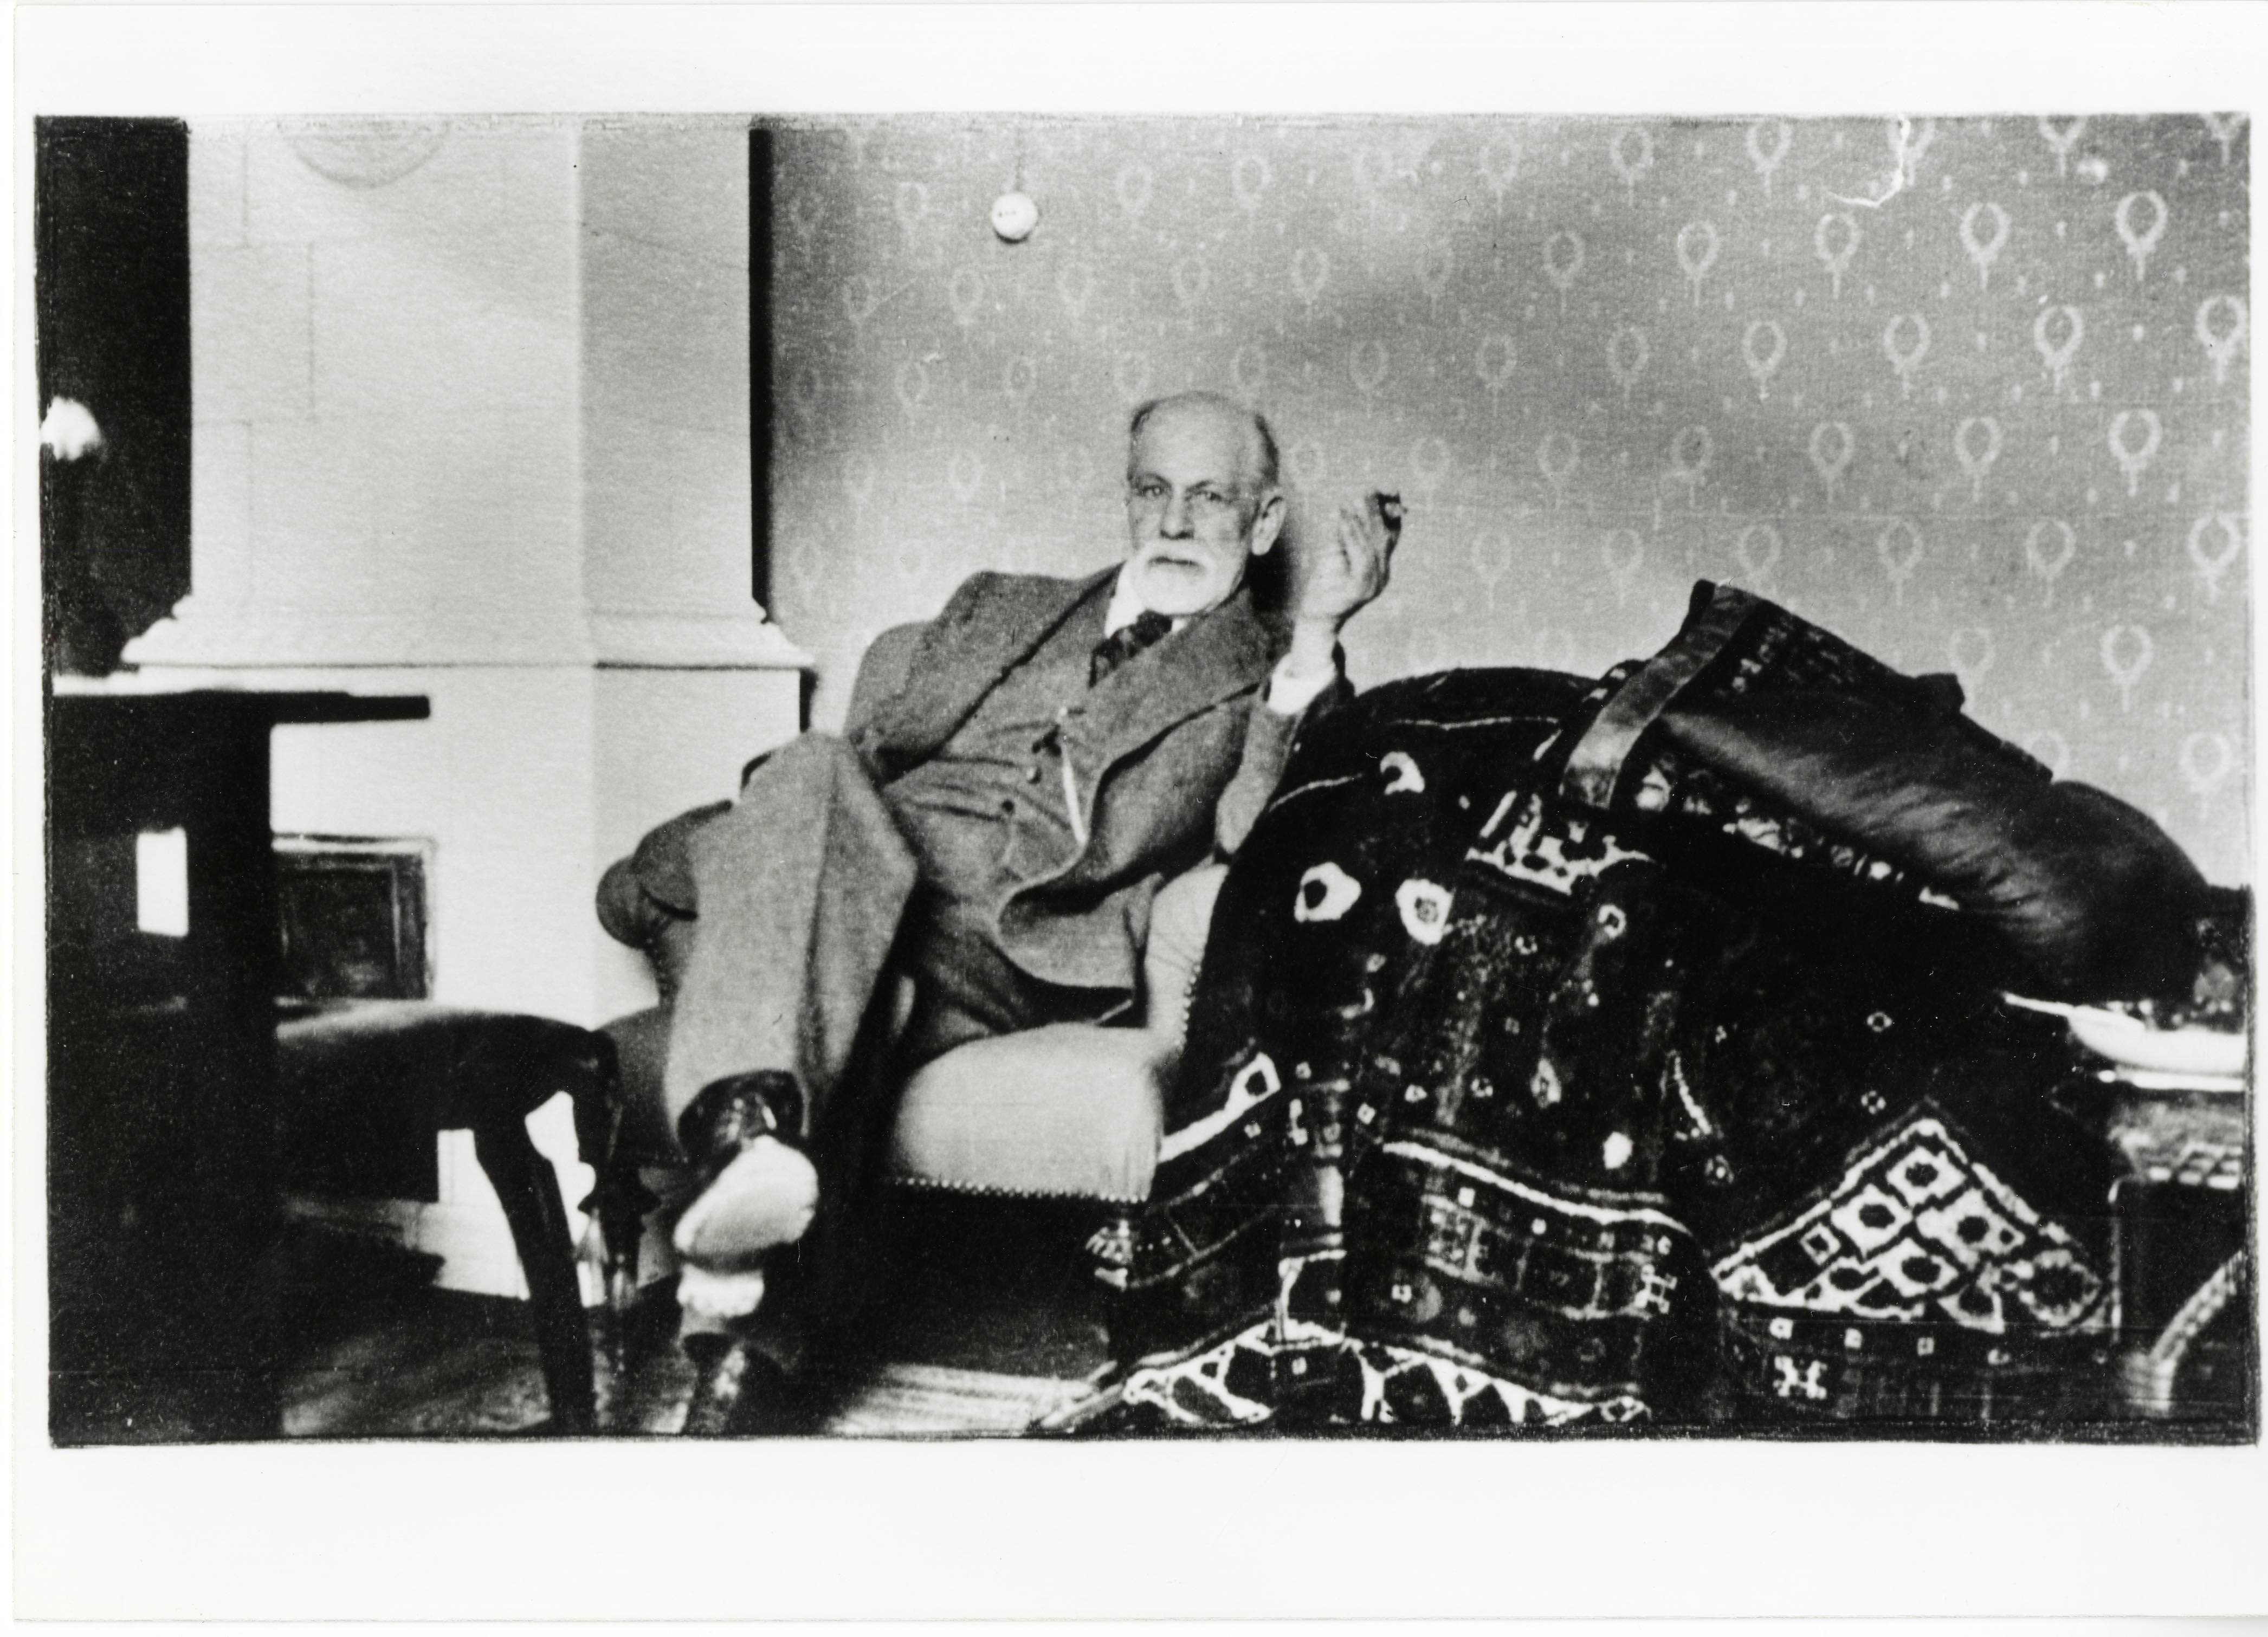 Sigmund Freud in the summer house next to a couch